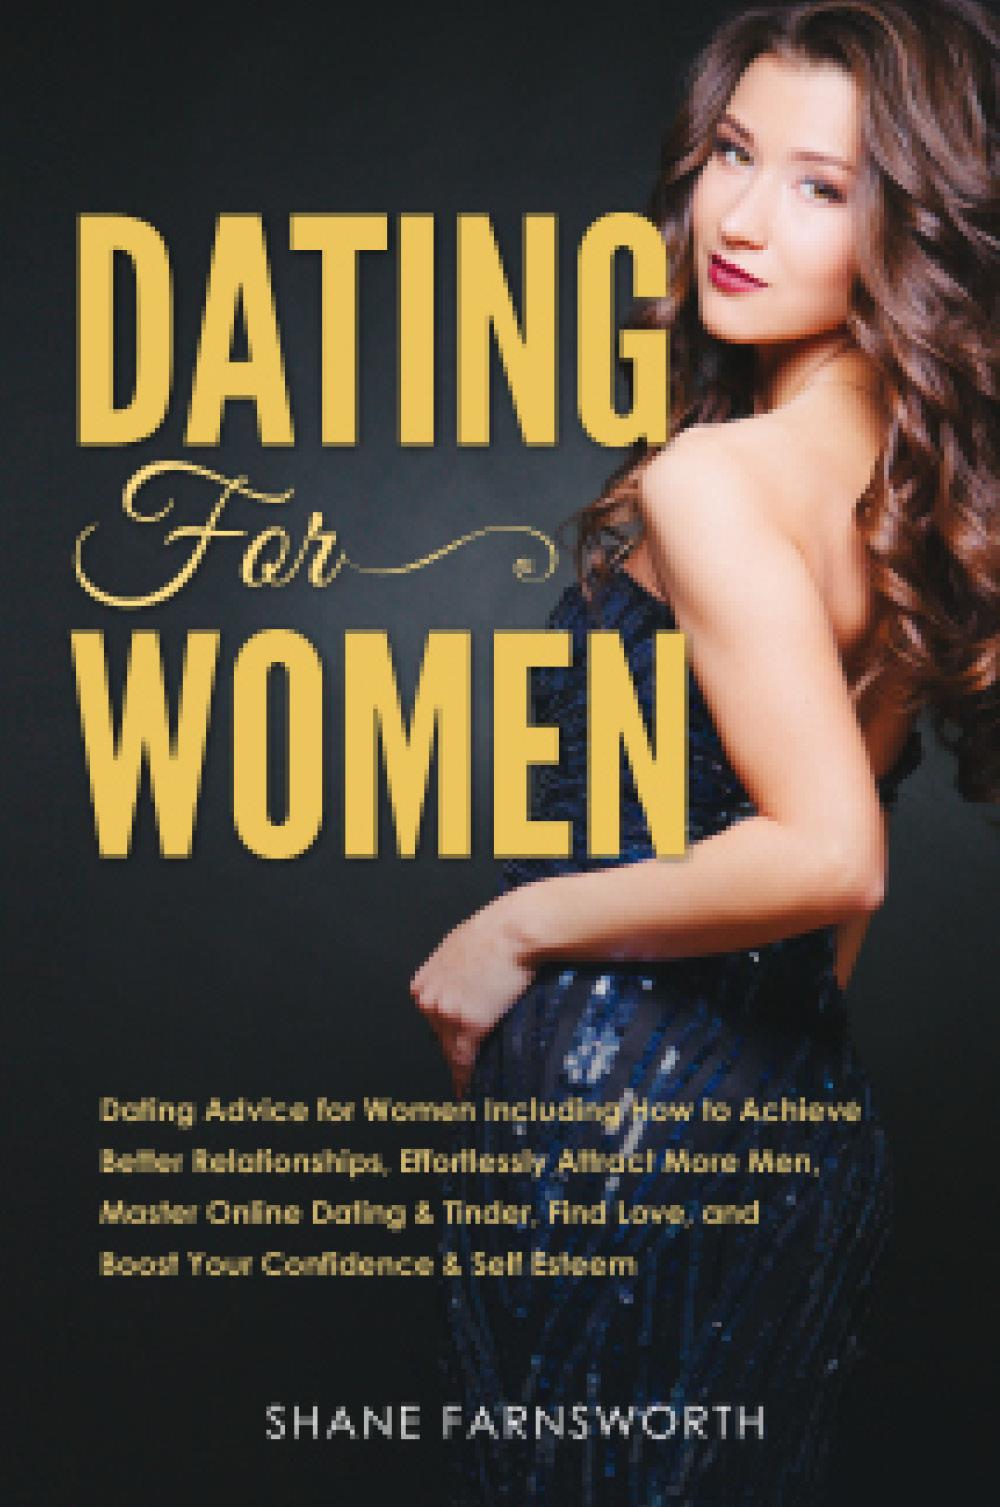 Dating for Women. Dating Advice for Women Including How to Achieve Better Relationships, Effortlessly Attract More Men, Master Online Dating & Tinder, Find Love, and Boost Your Confidence & Self Esteem